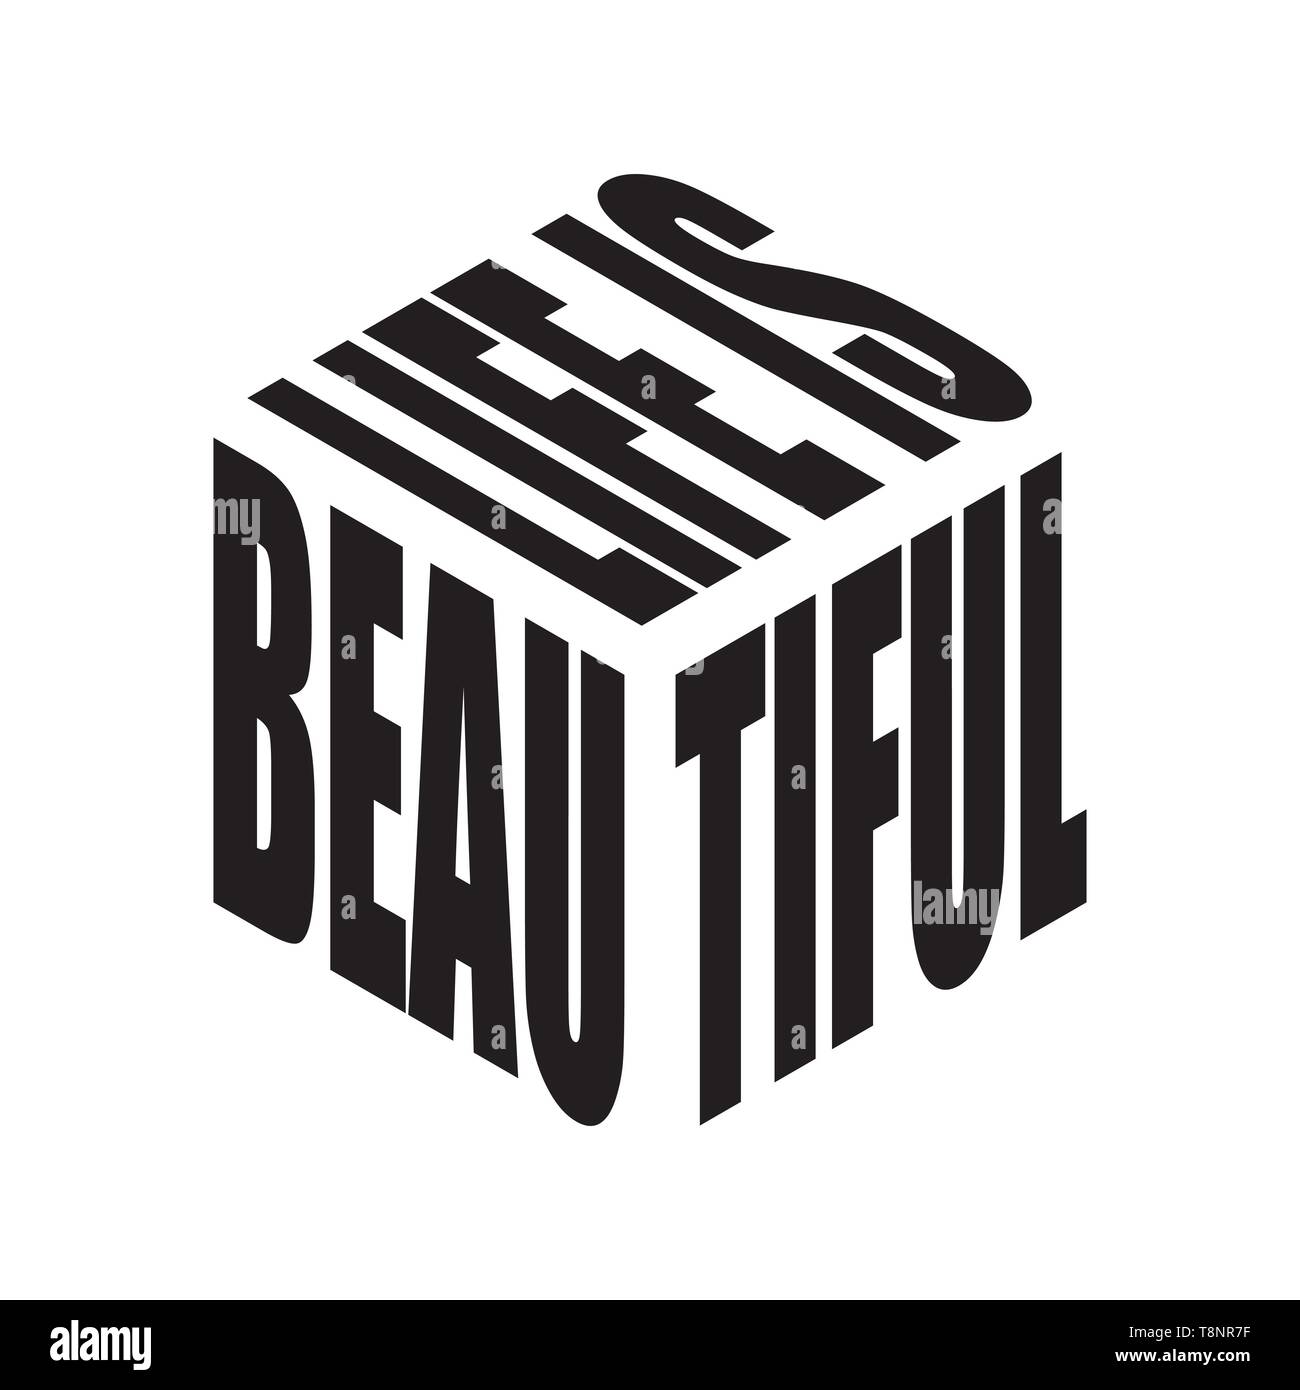 Life is beautiful. Simple text slogan t shirt. Graphic phrases